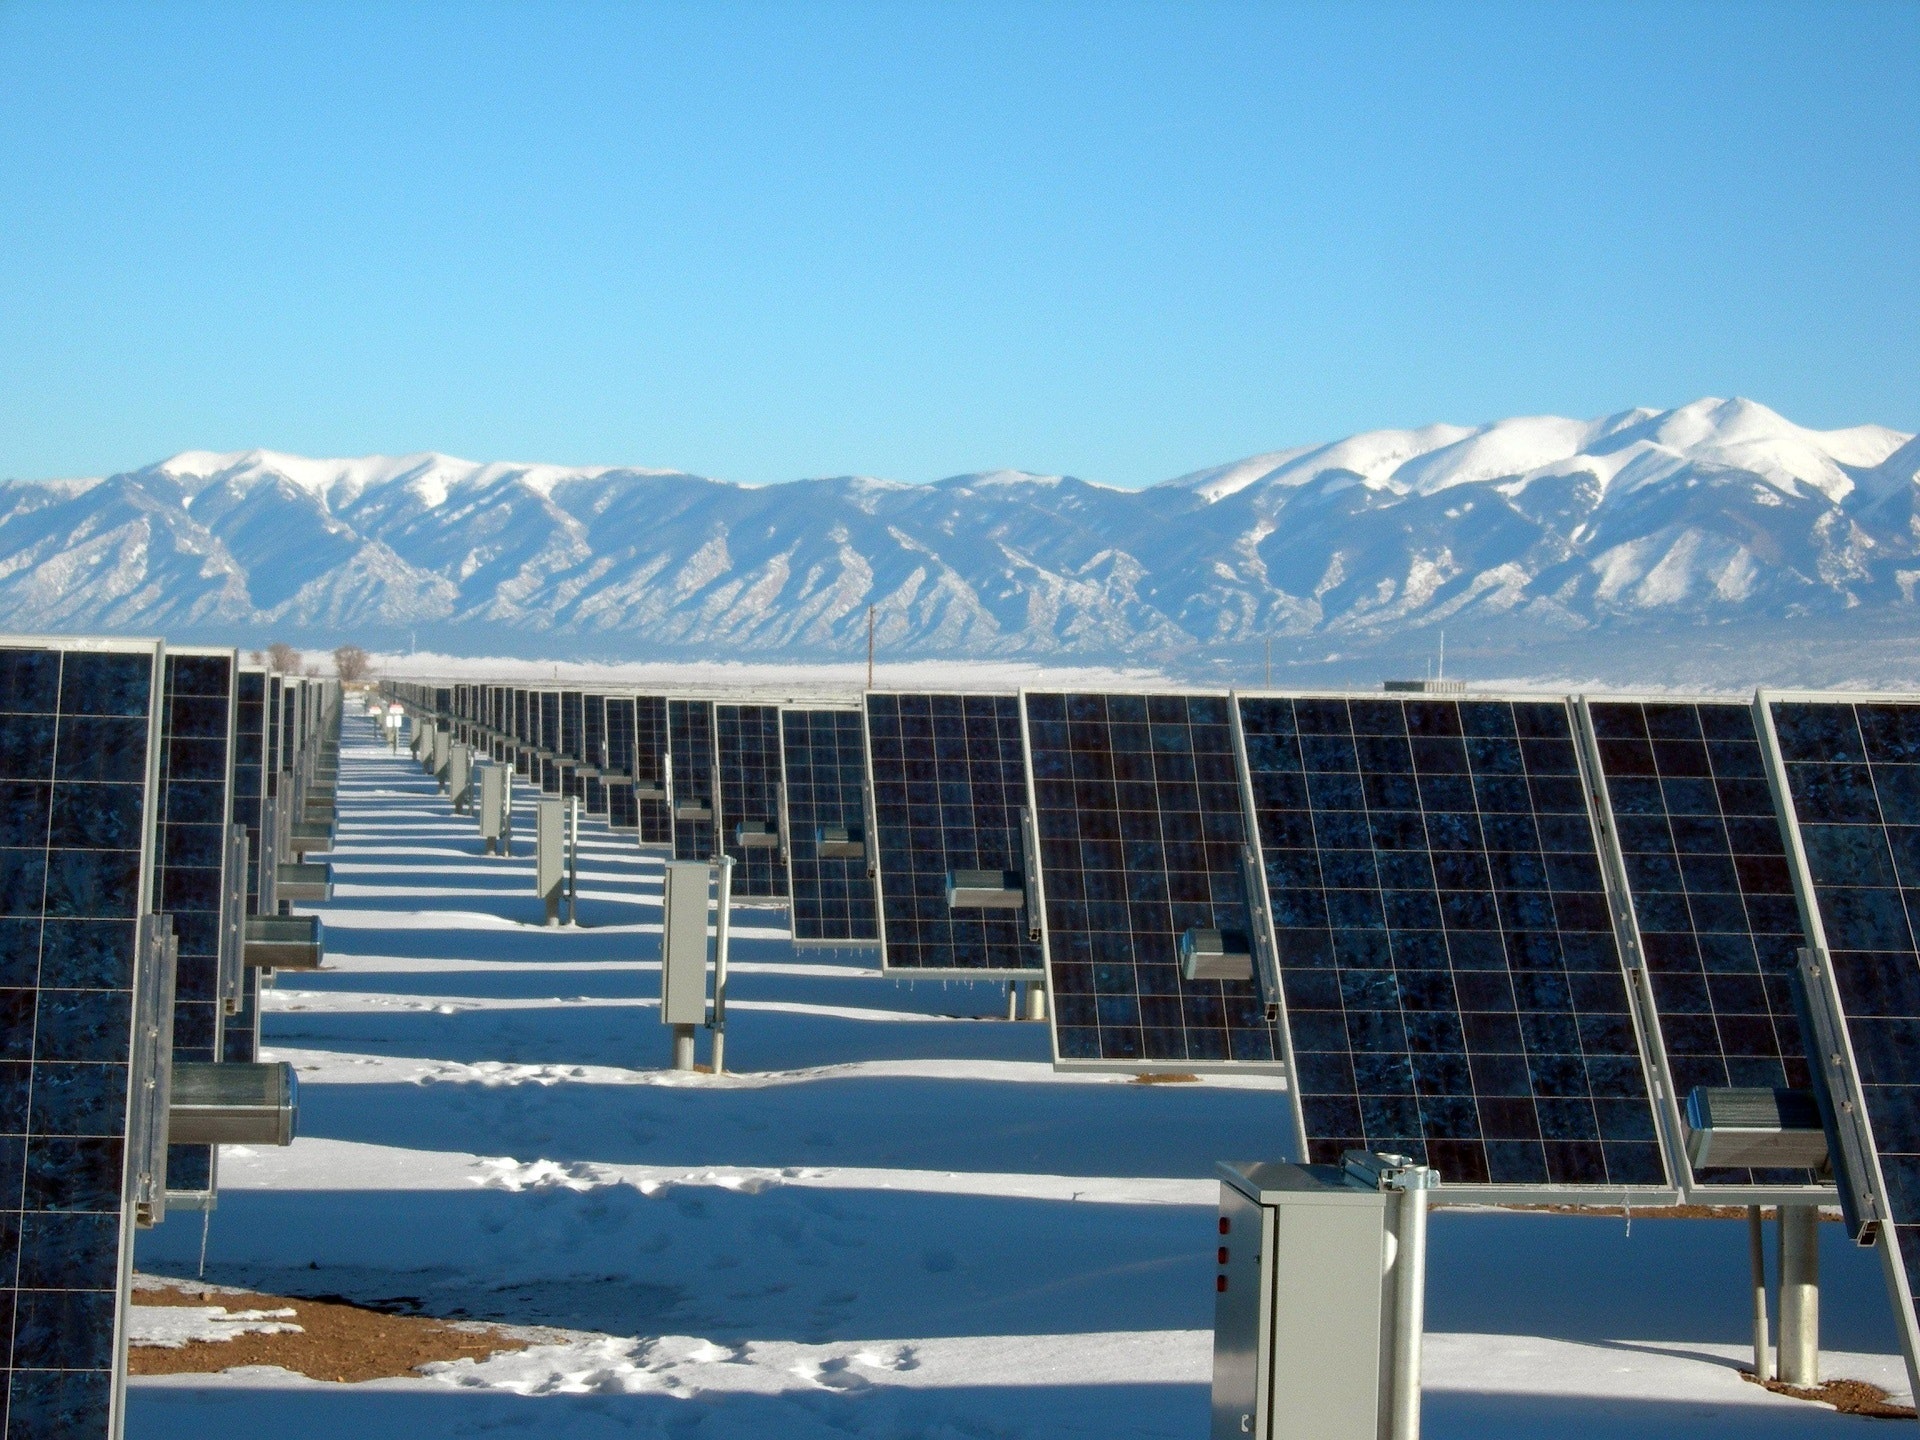 What Are the Advantages and Disadvantages of Solar Power?